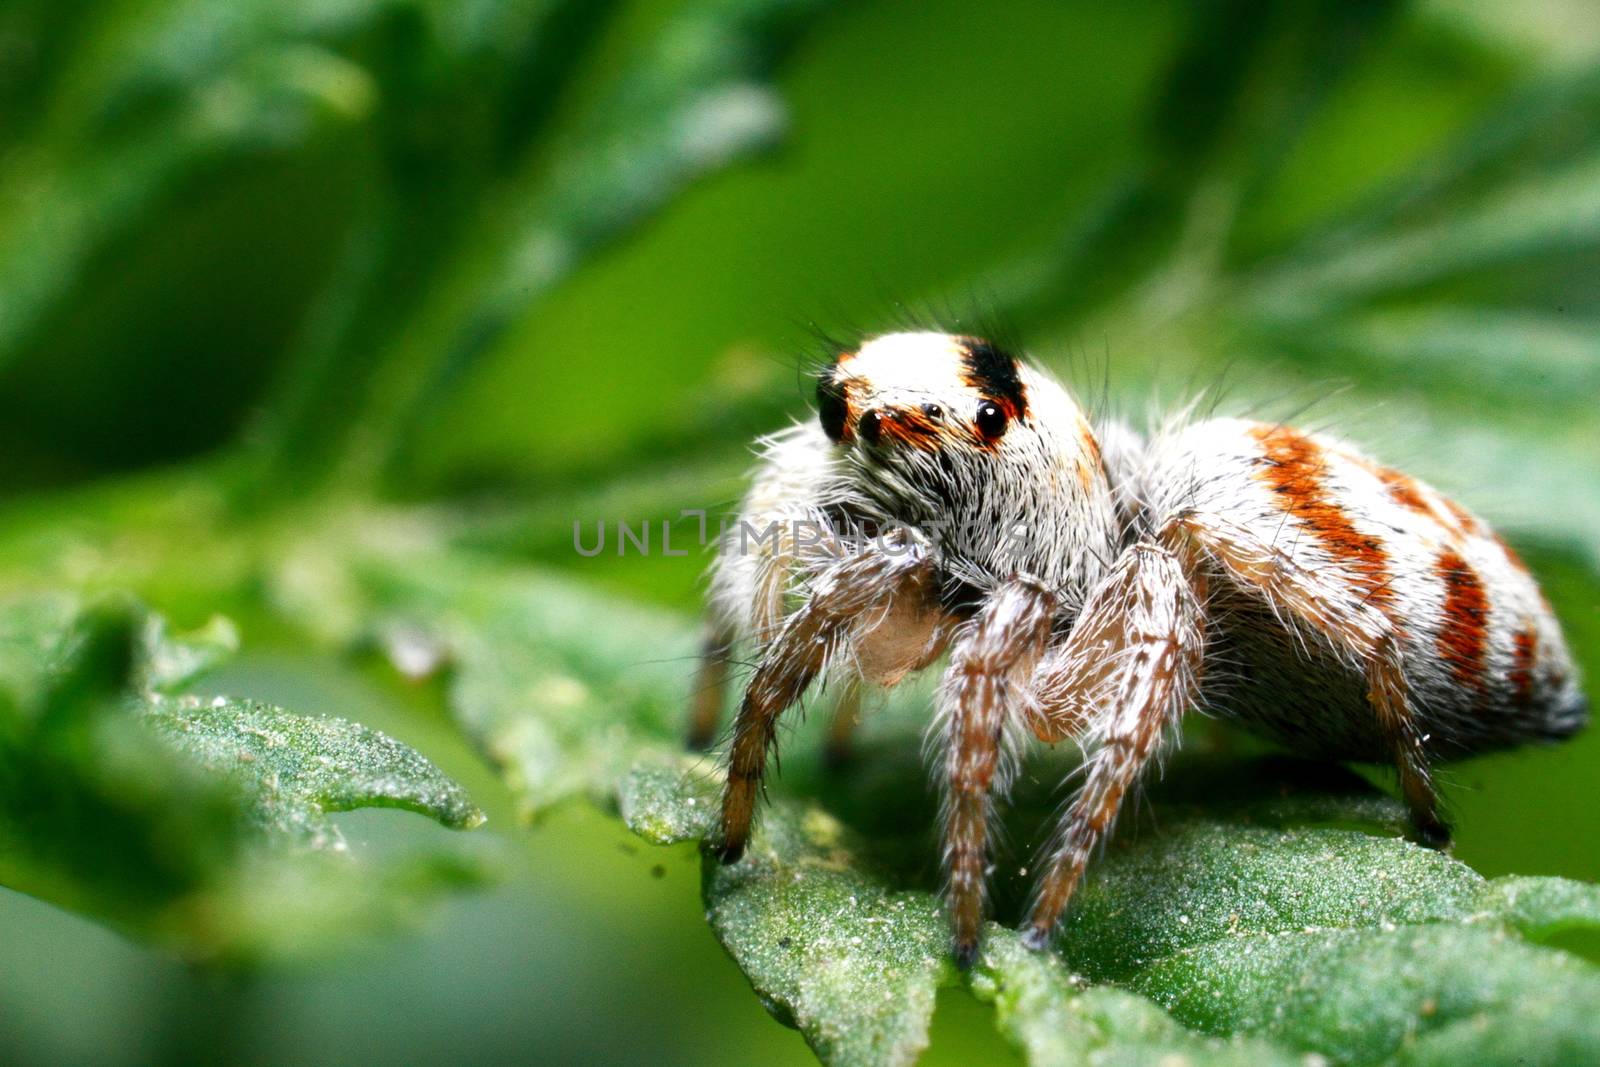 Jumping spider close up. Macro shot. Spider portrait. Spider with beautiful eyes close-up. Insect. High quality photo